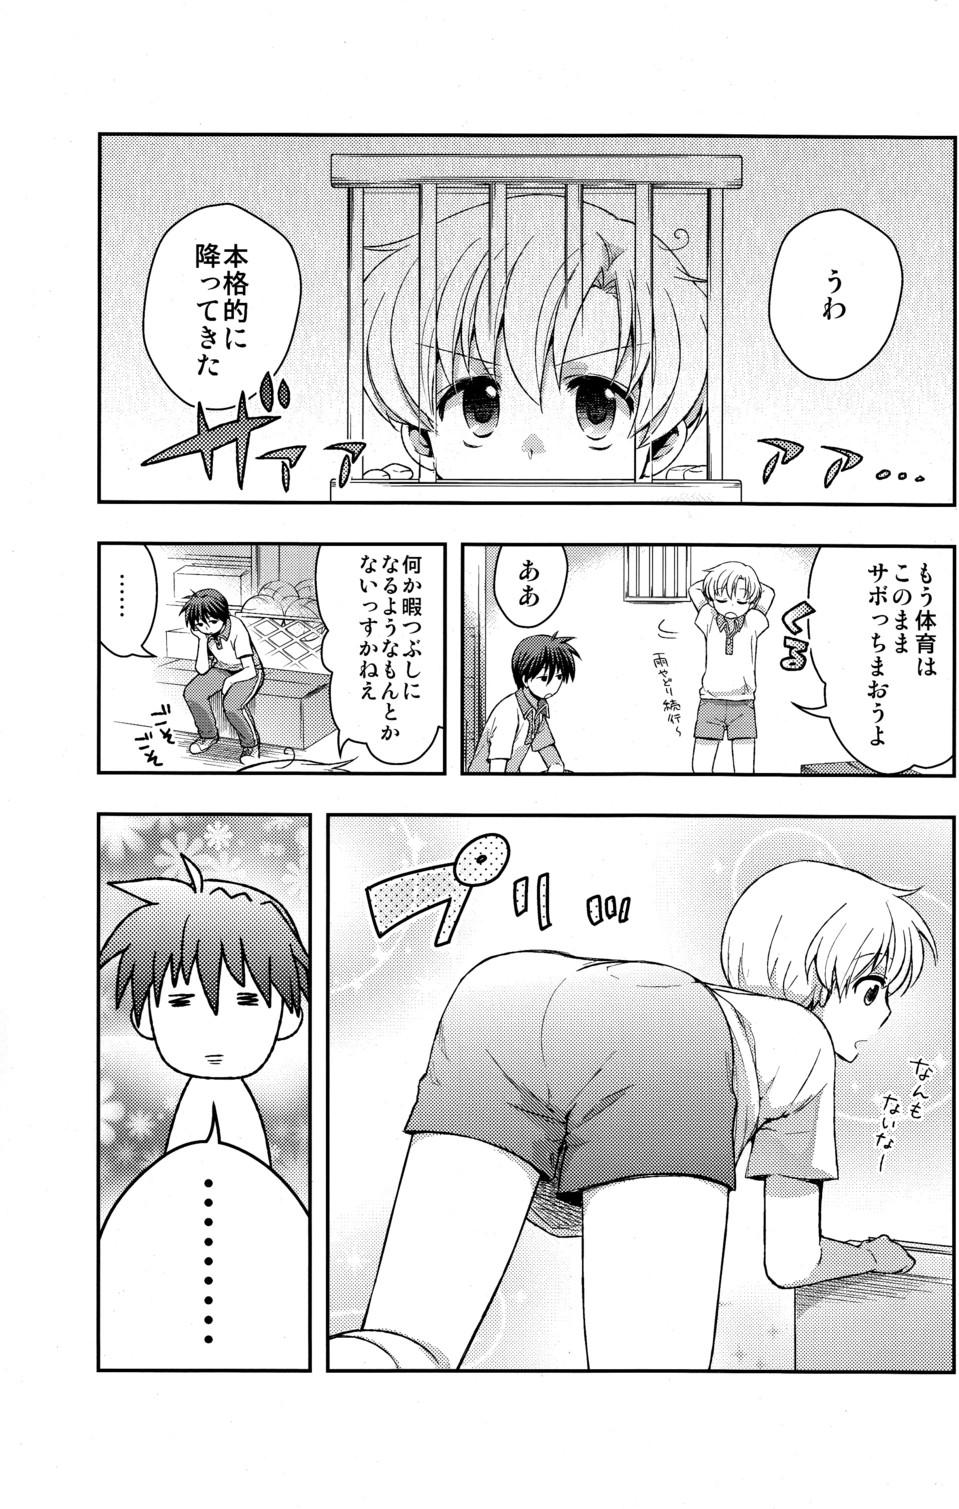 Softcore Sunohara Mania 4 - Clannad Ball Busting - Page 7